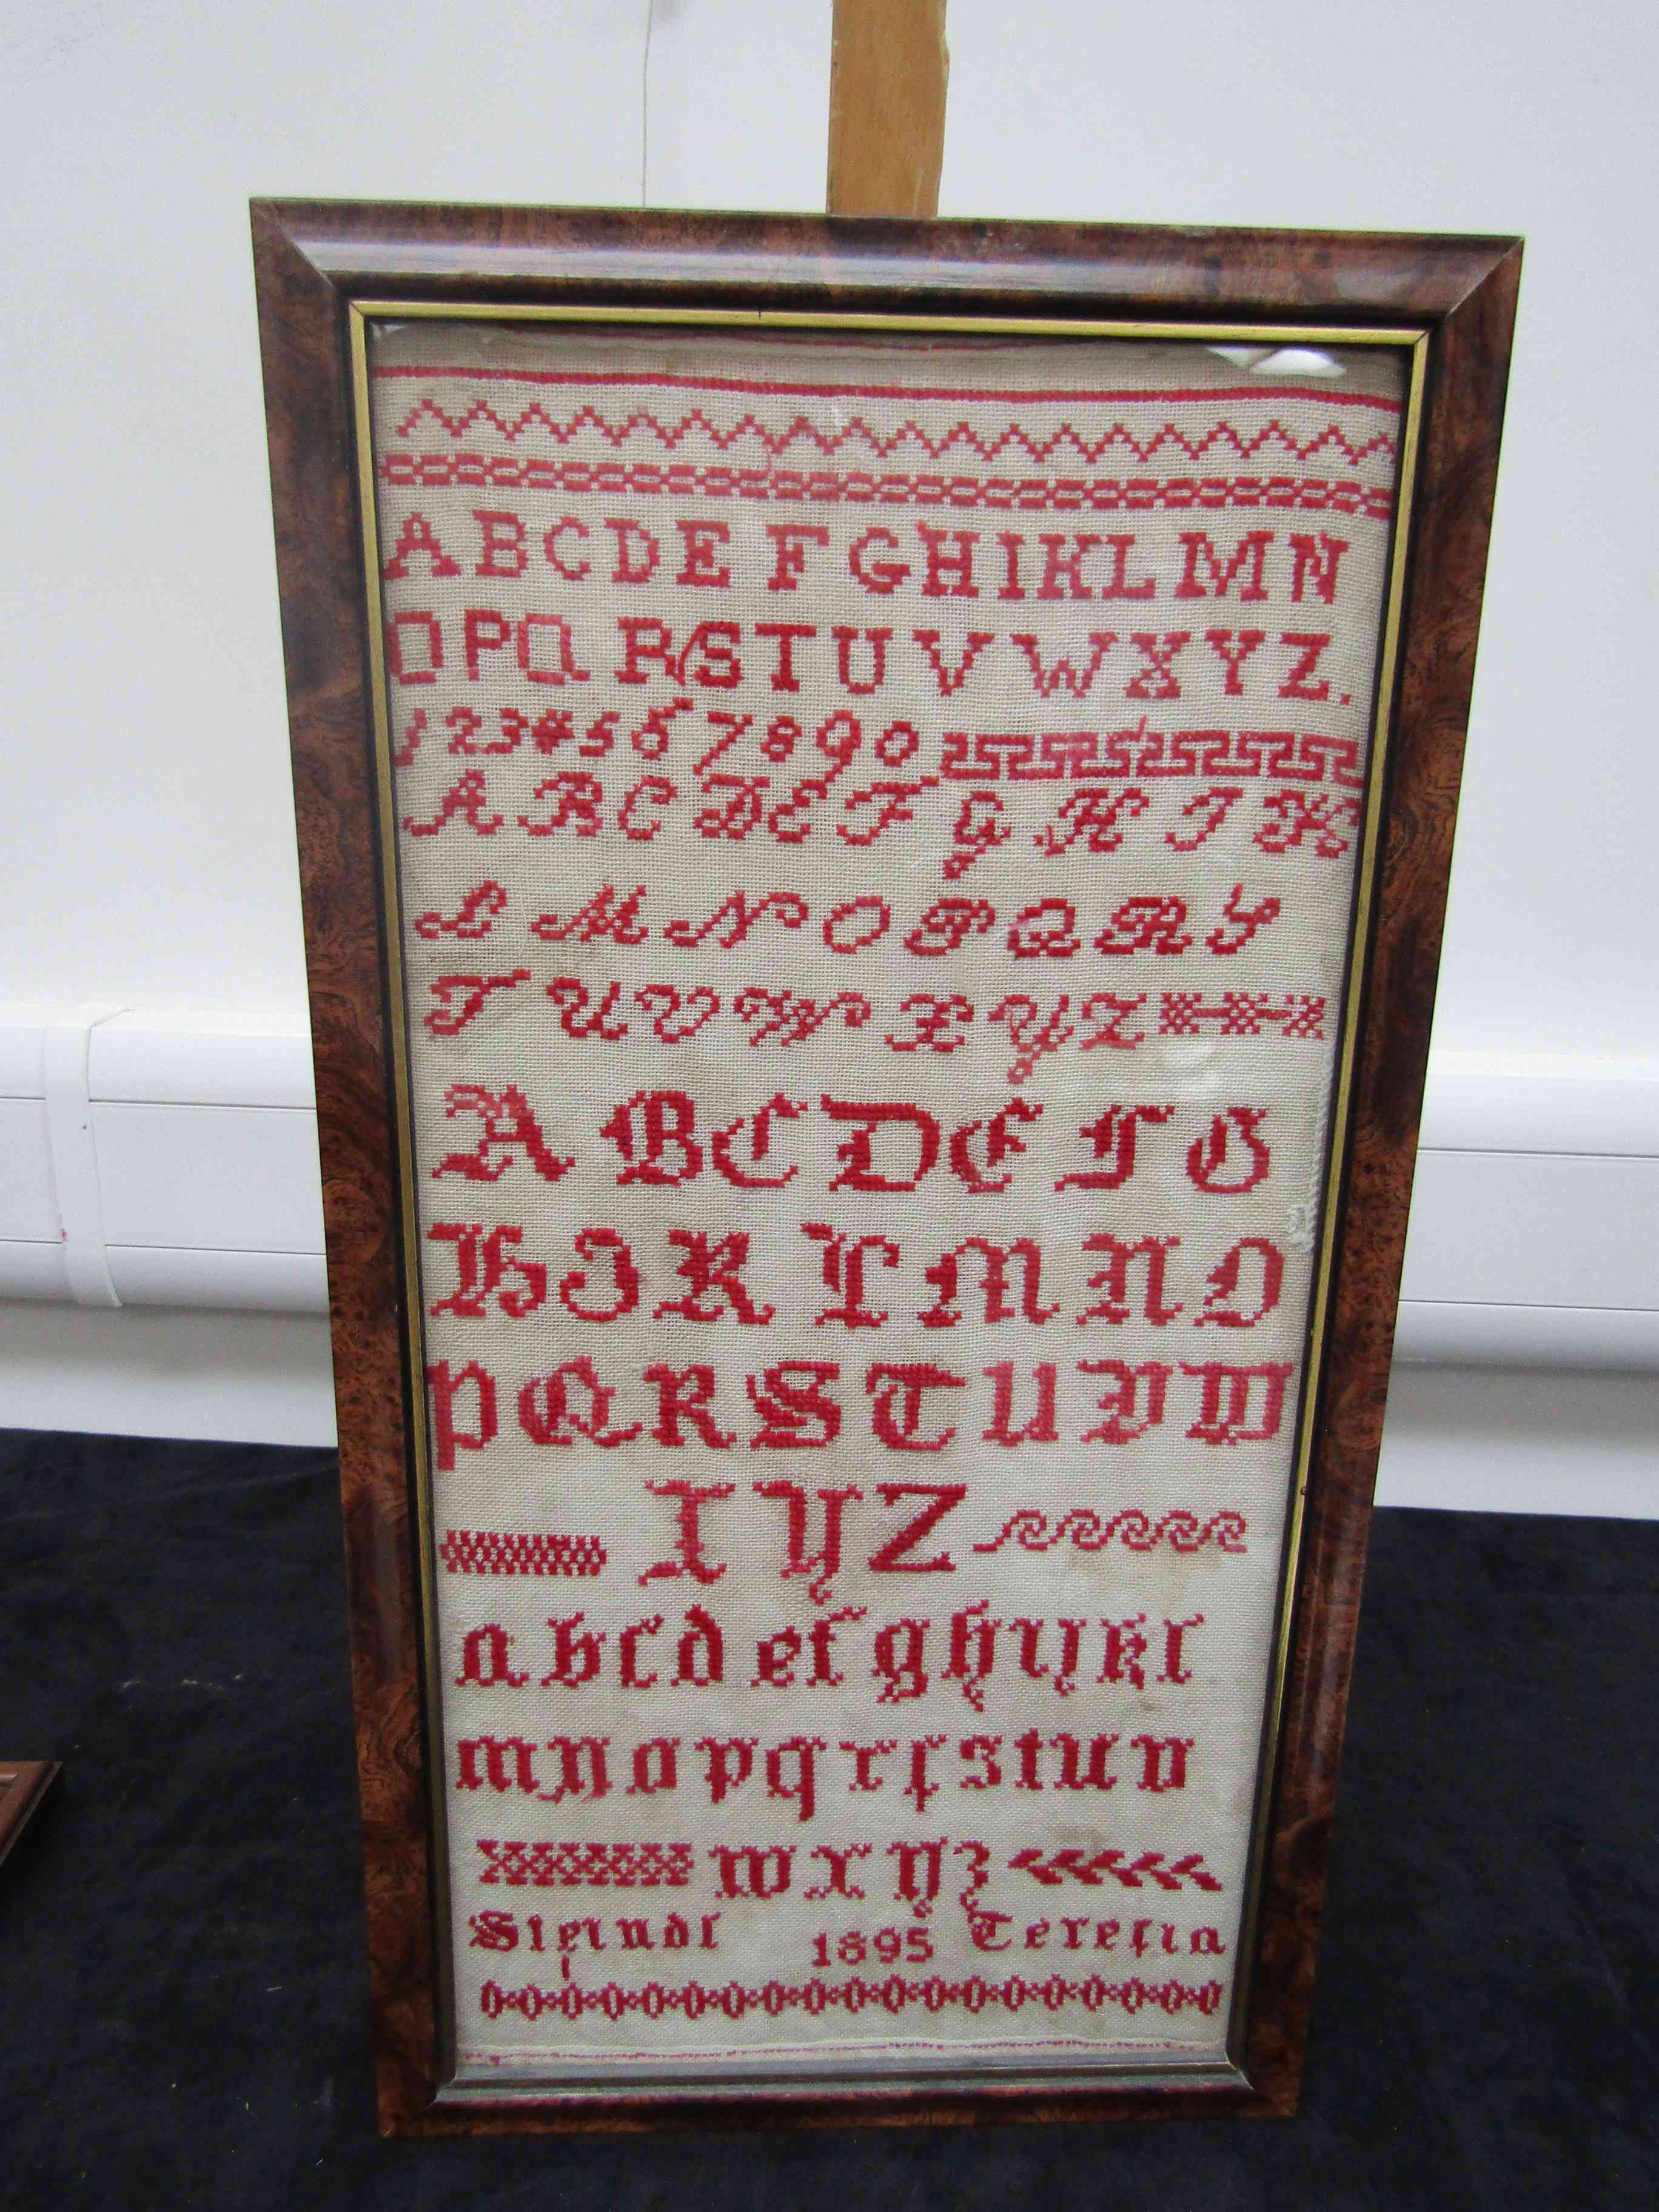 A late Victorian schoolroom sampler worked in red thread cross-stitch on a narrow-weave linen